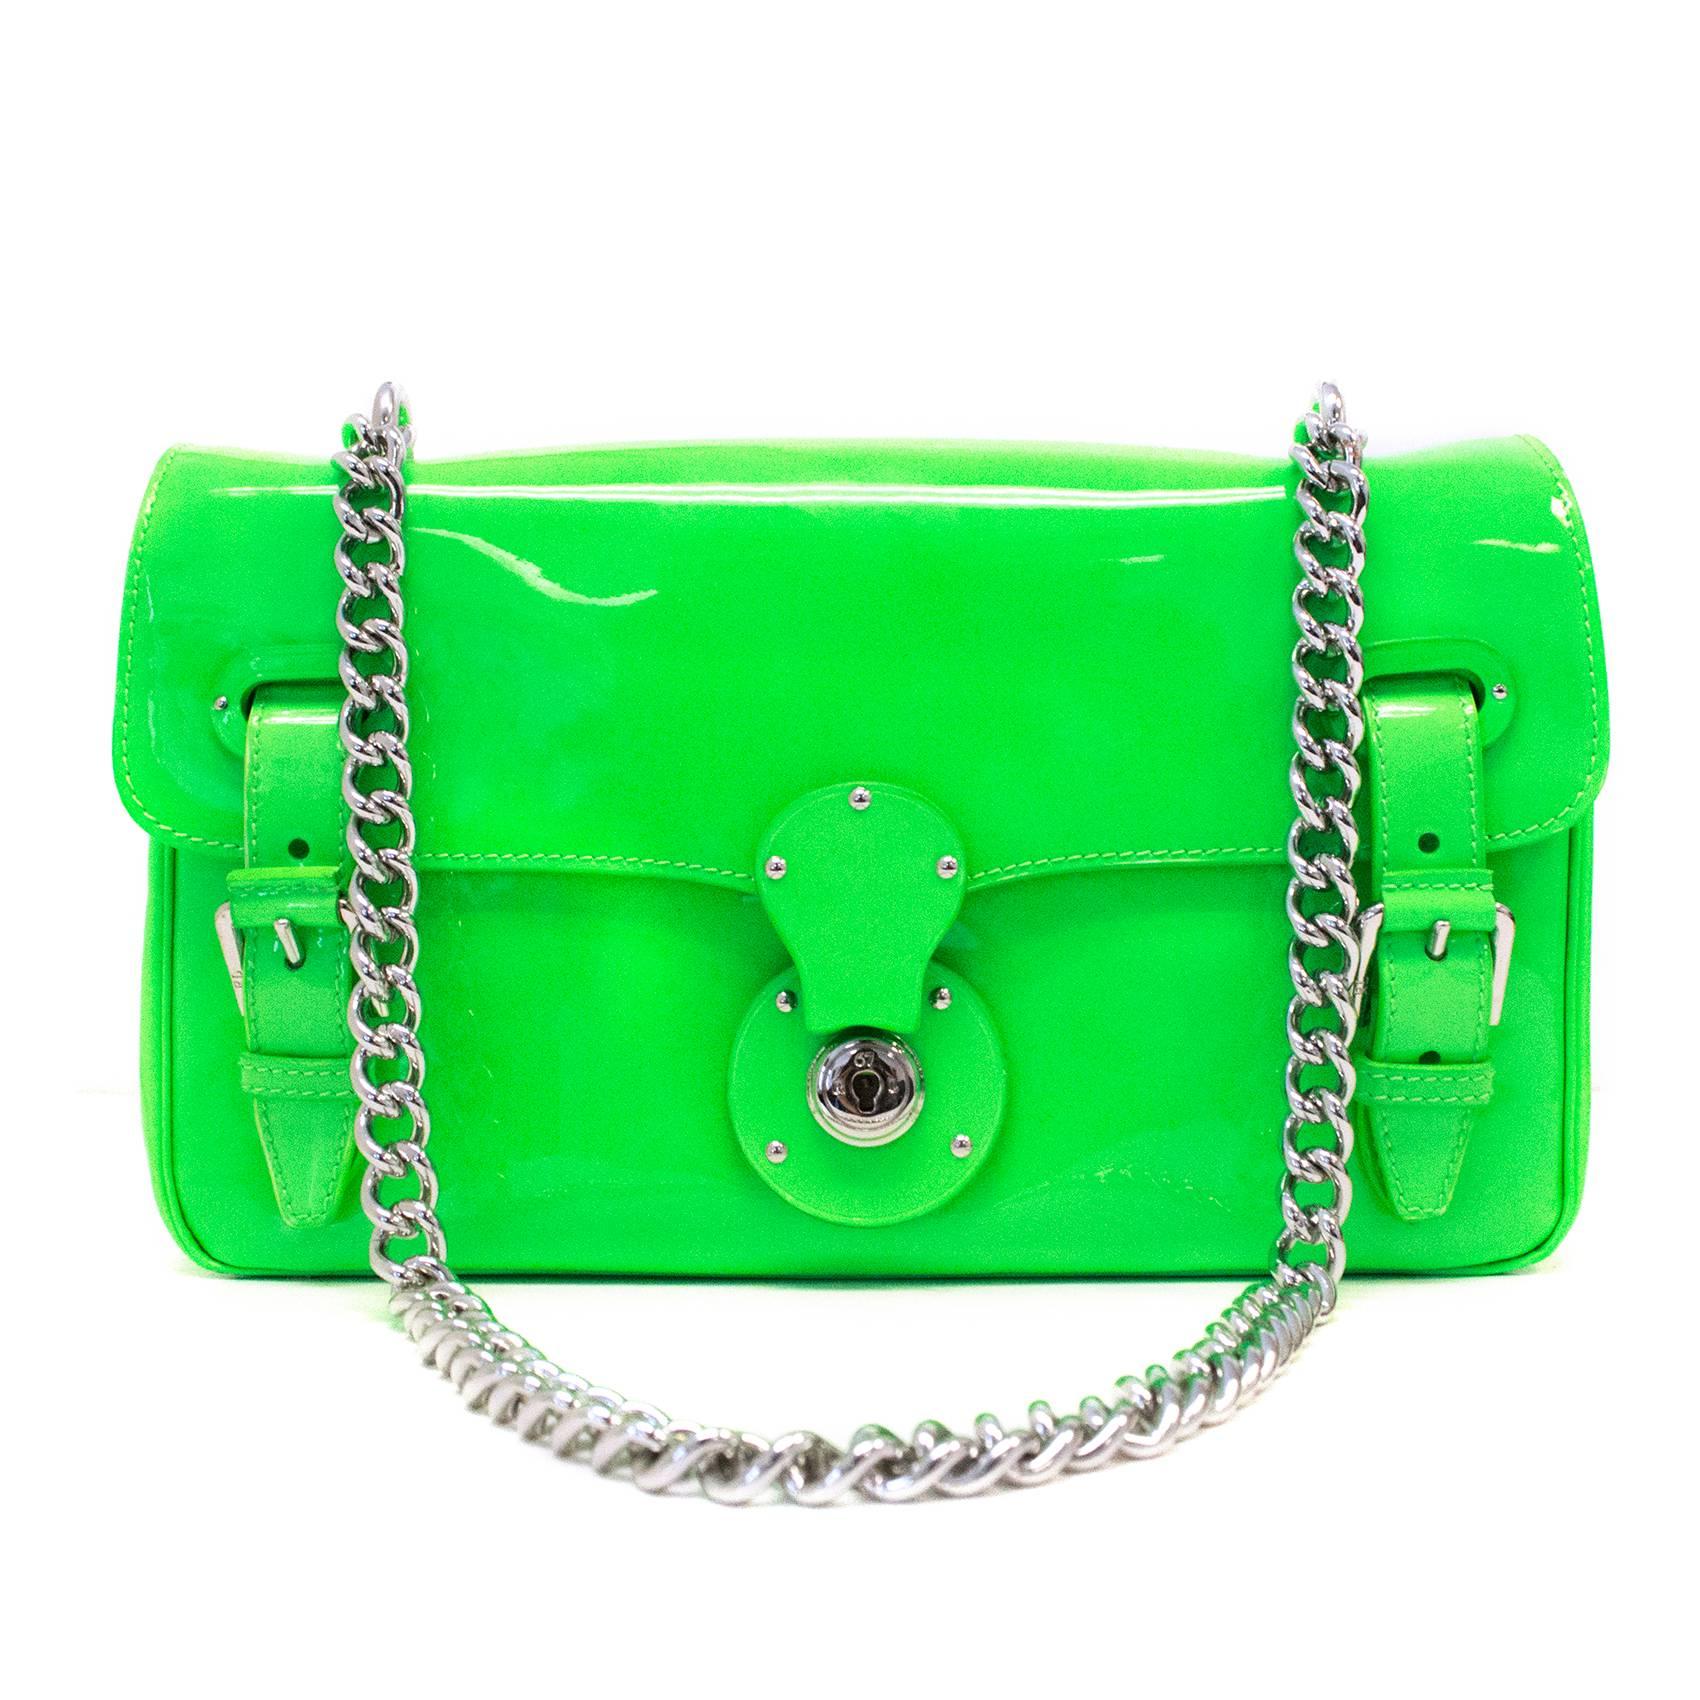 Ralph Lauren 'Ricky' shoulder bag in neon green patent lather. Silver hardware and buckle closures on front flap.
Slight colour transfer on bottom of bag and on front under flap, slight dent on underside of flap.( please see image 9 for reference).